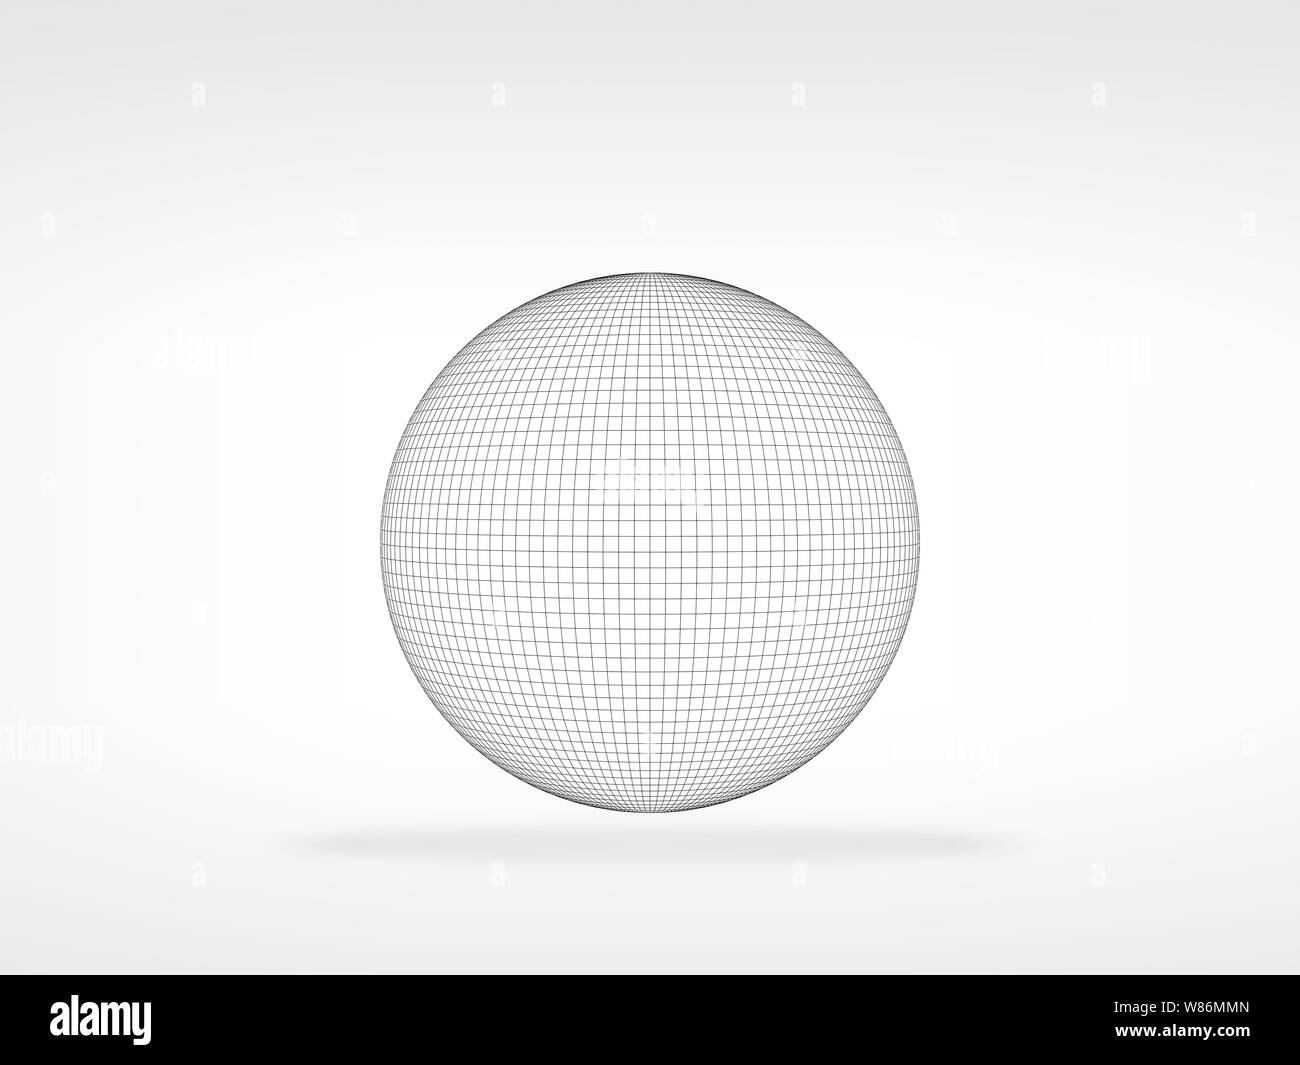 Wire frame spherical object with soft shadow over white background, 3d rendering illustration Stock Photo